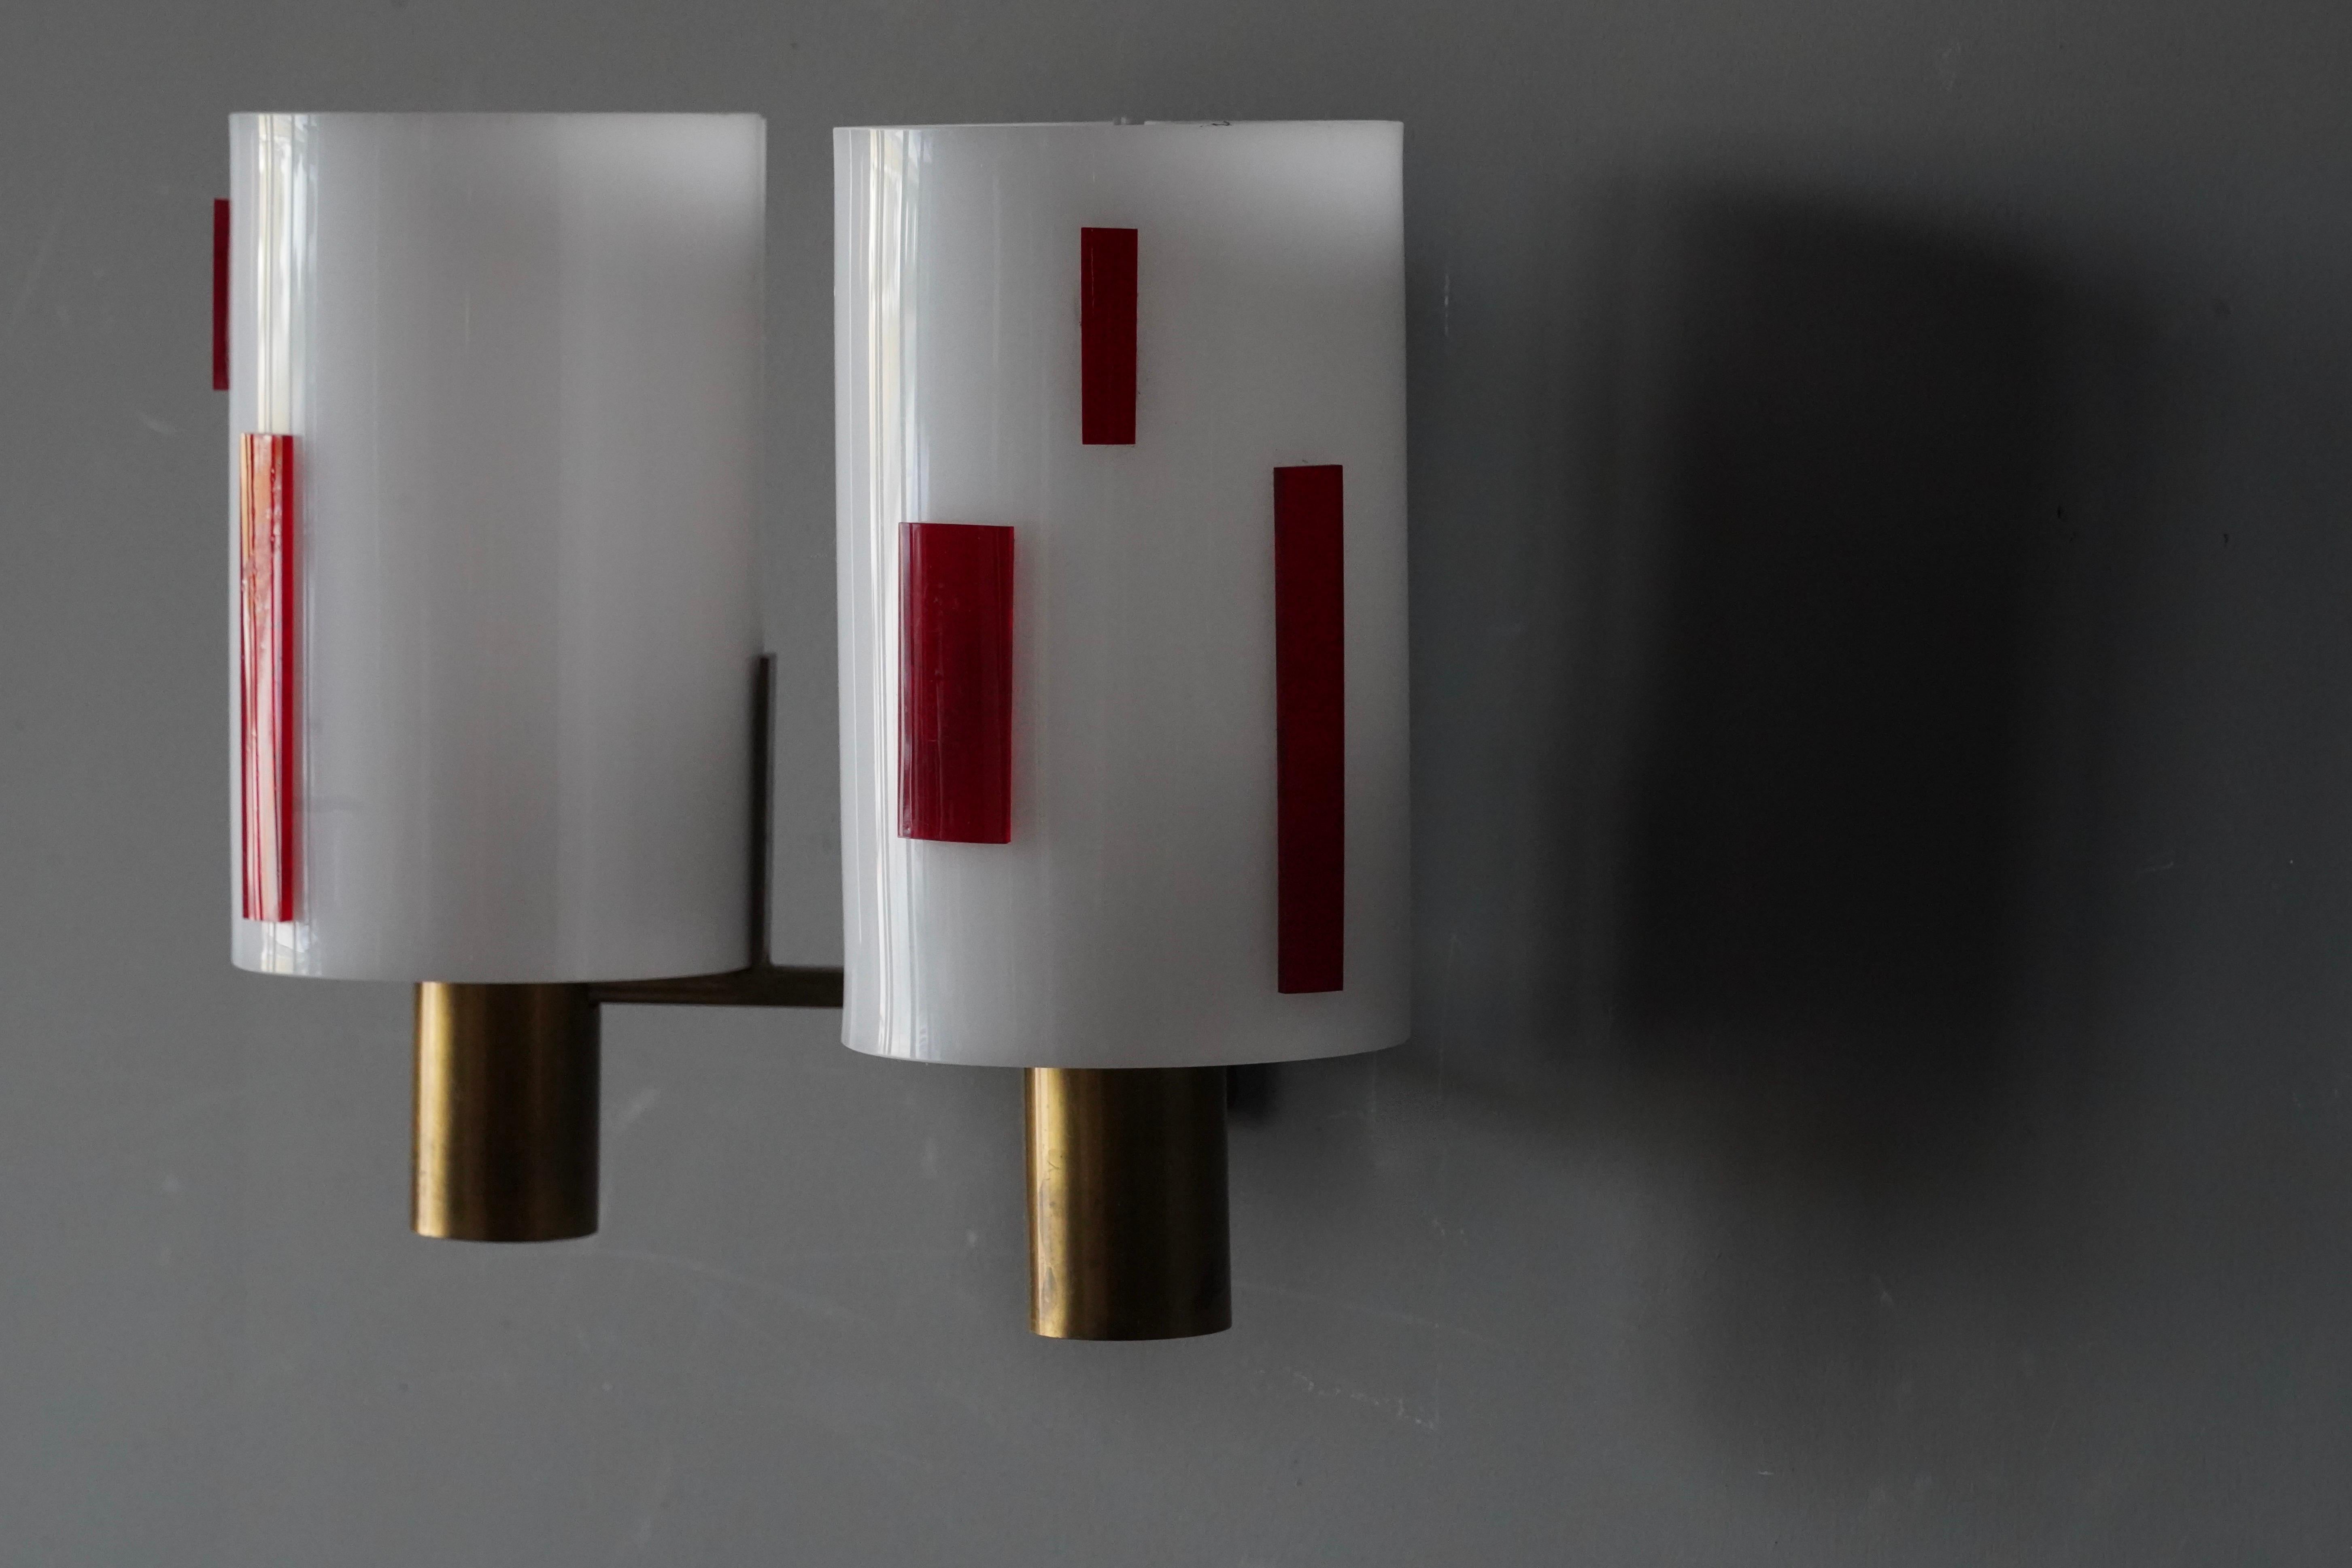 Mid-20th Century Swedish Designer, Wall Lights, Brass, Red White Acrylic, Sweden, 1960s For Sale